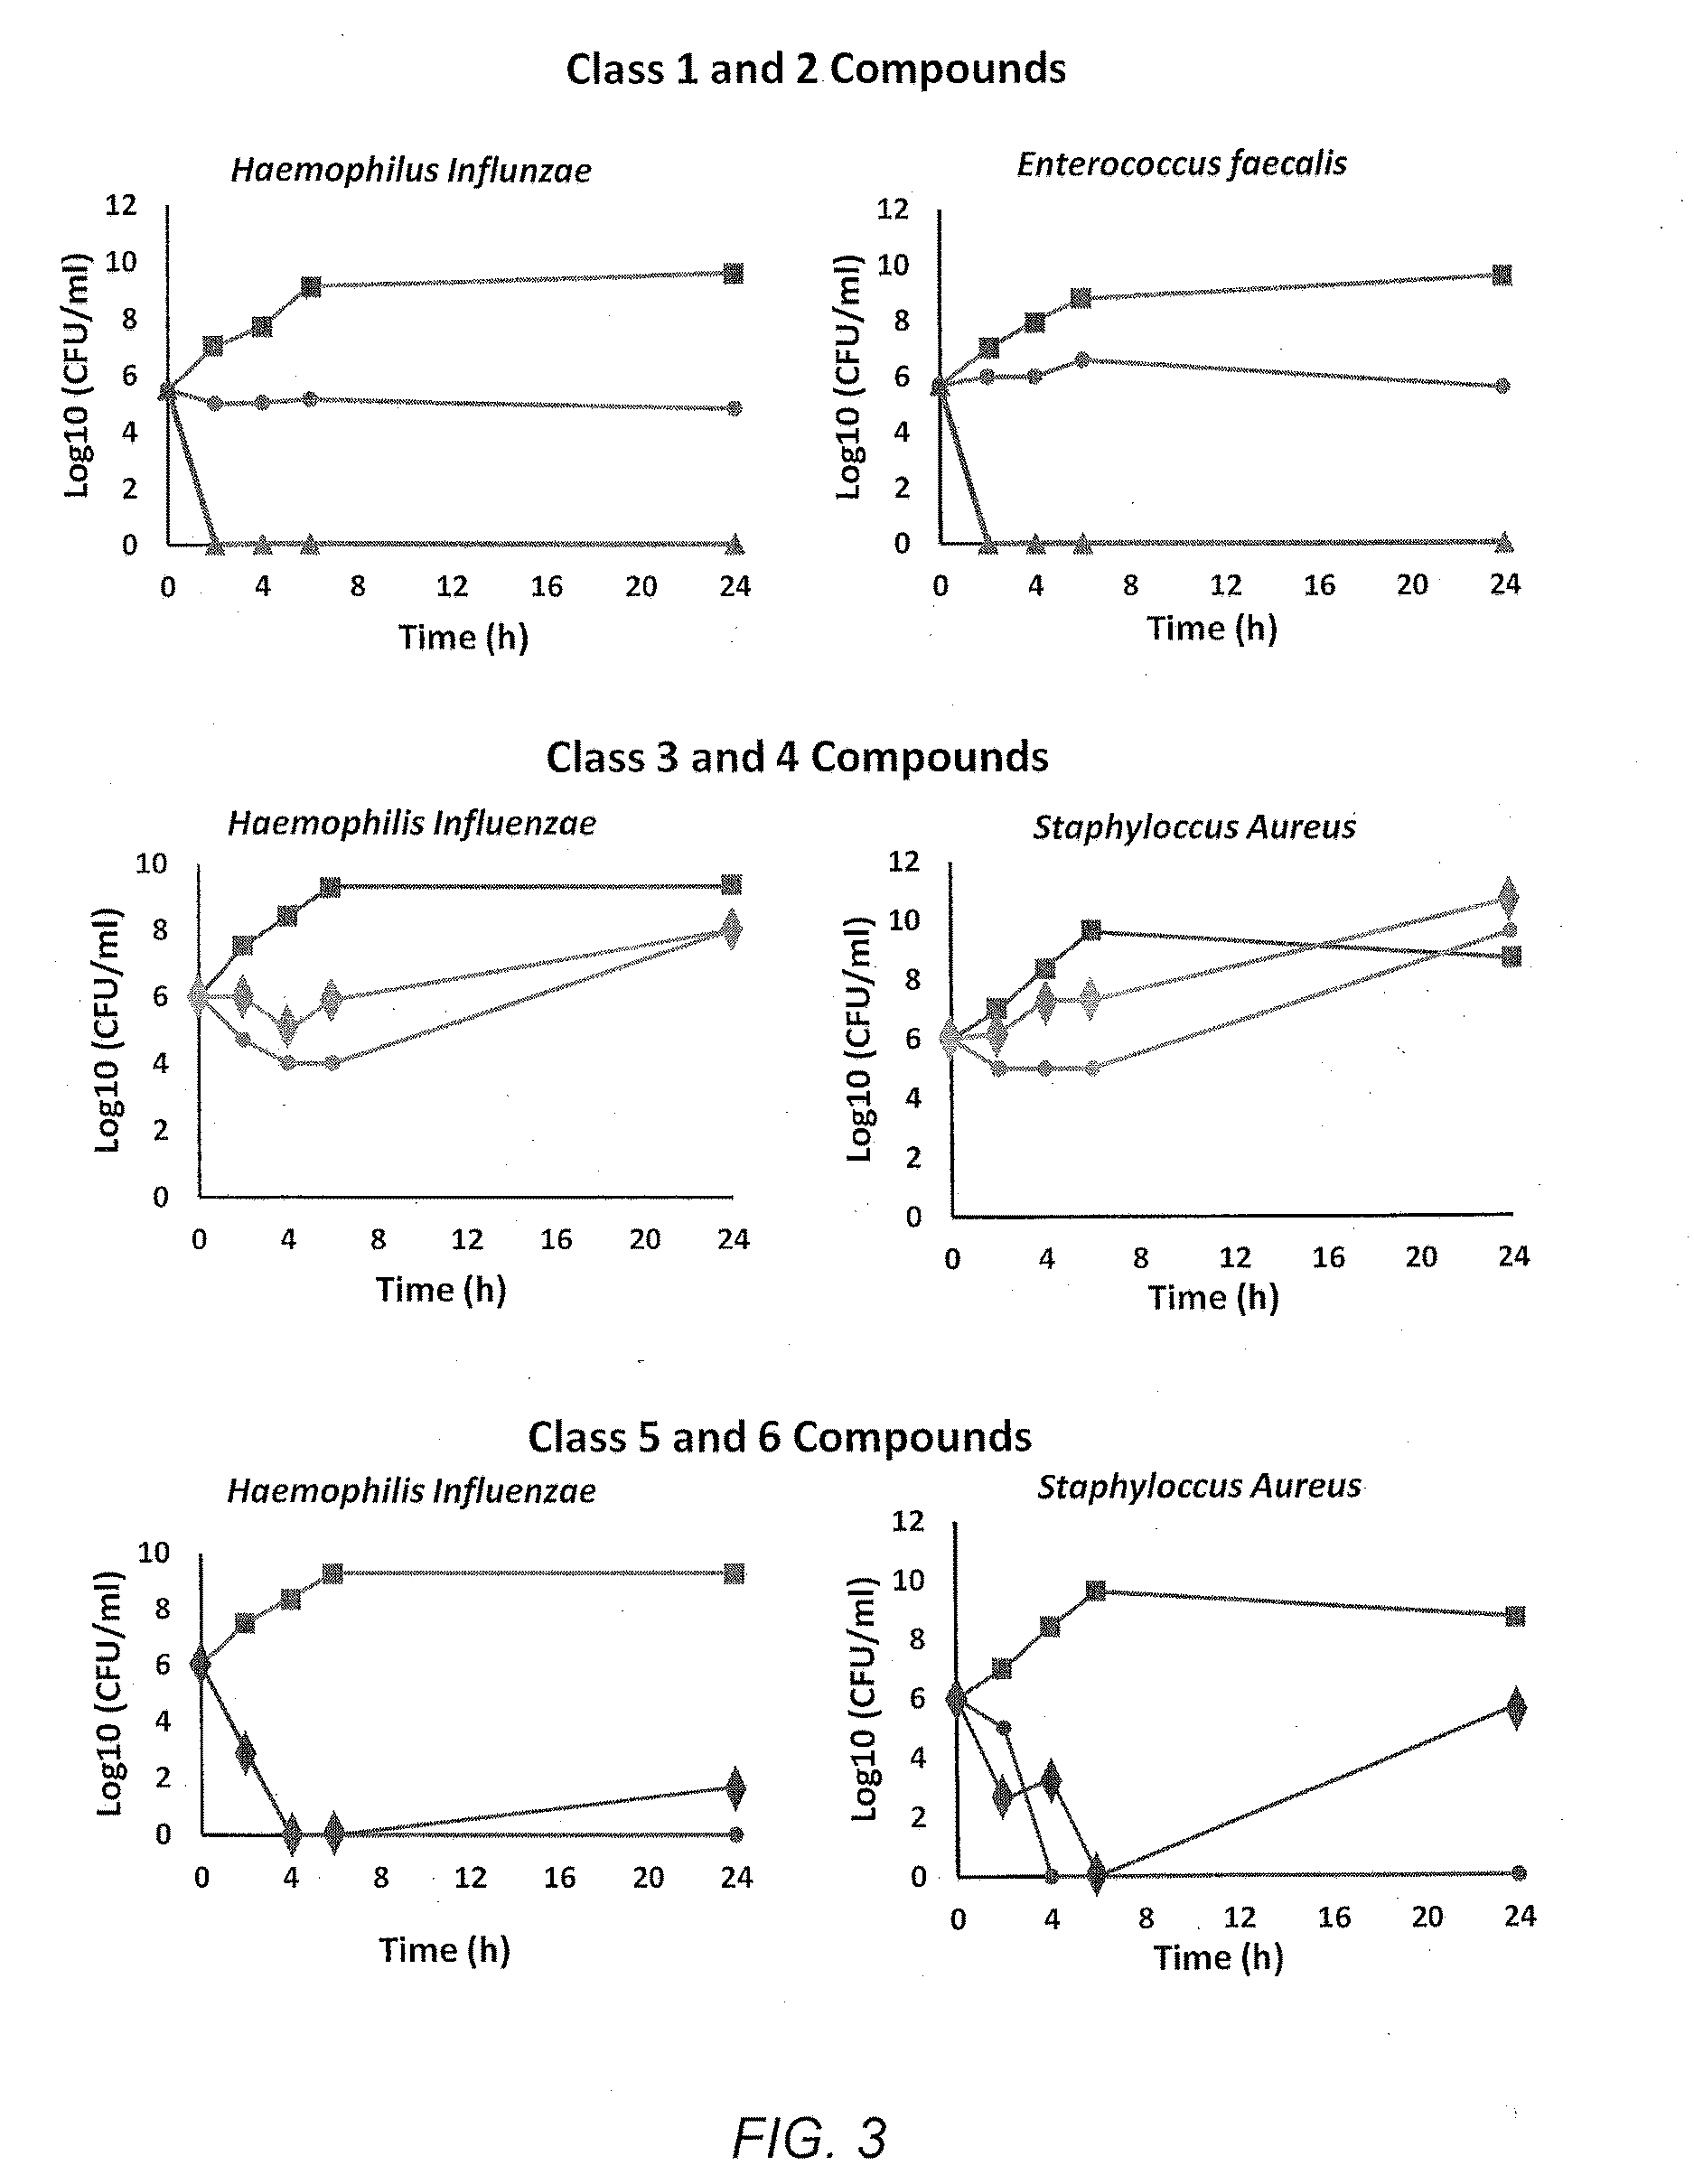 Antibiotic compounds that inhibit bacterial protein synthesis